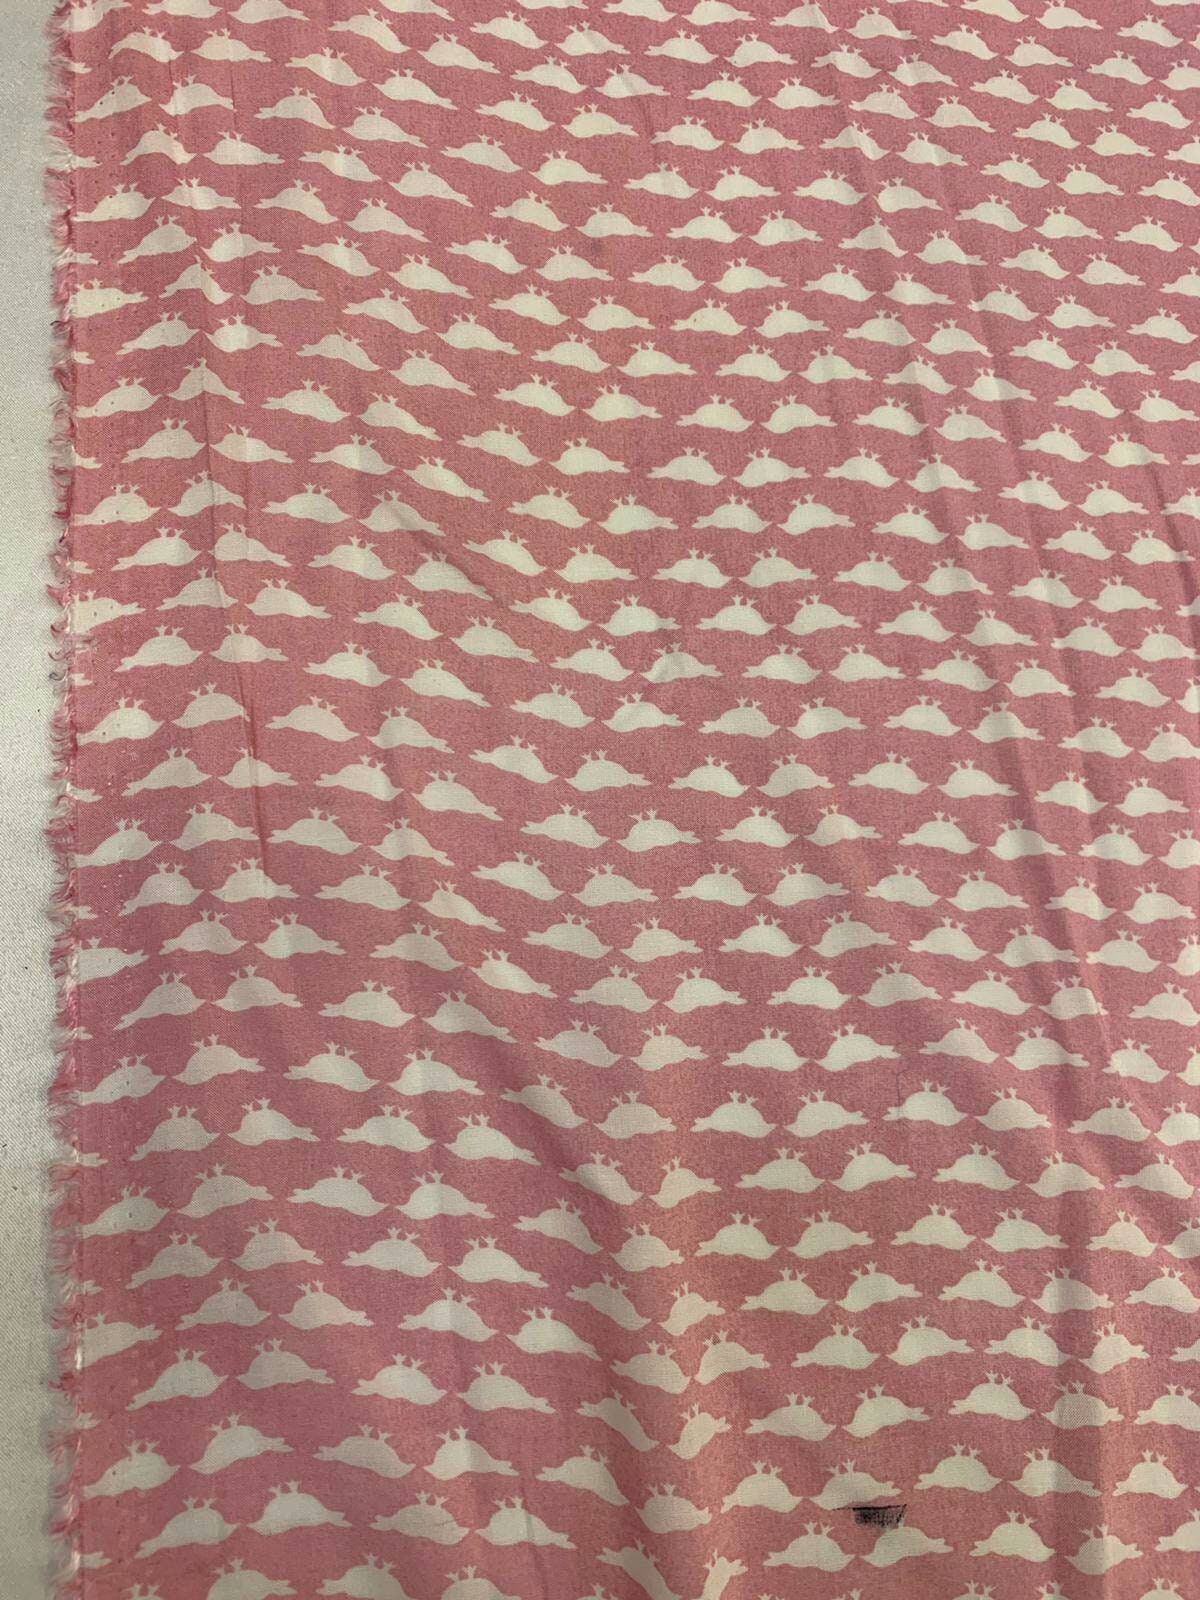 Rayon challis birds on light pink background Fabric Sold by the yard soft organic kids fabric flowy ligth weight